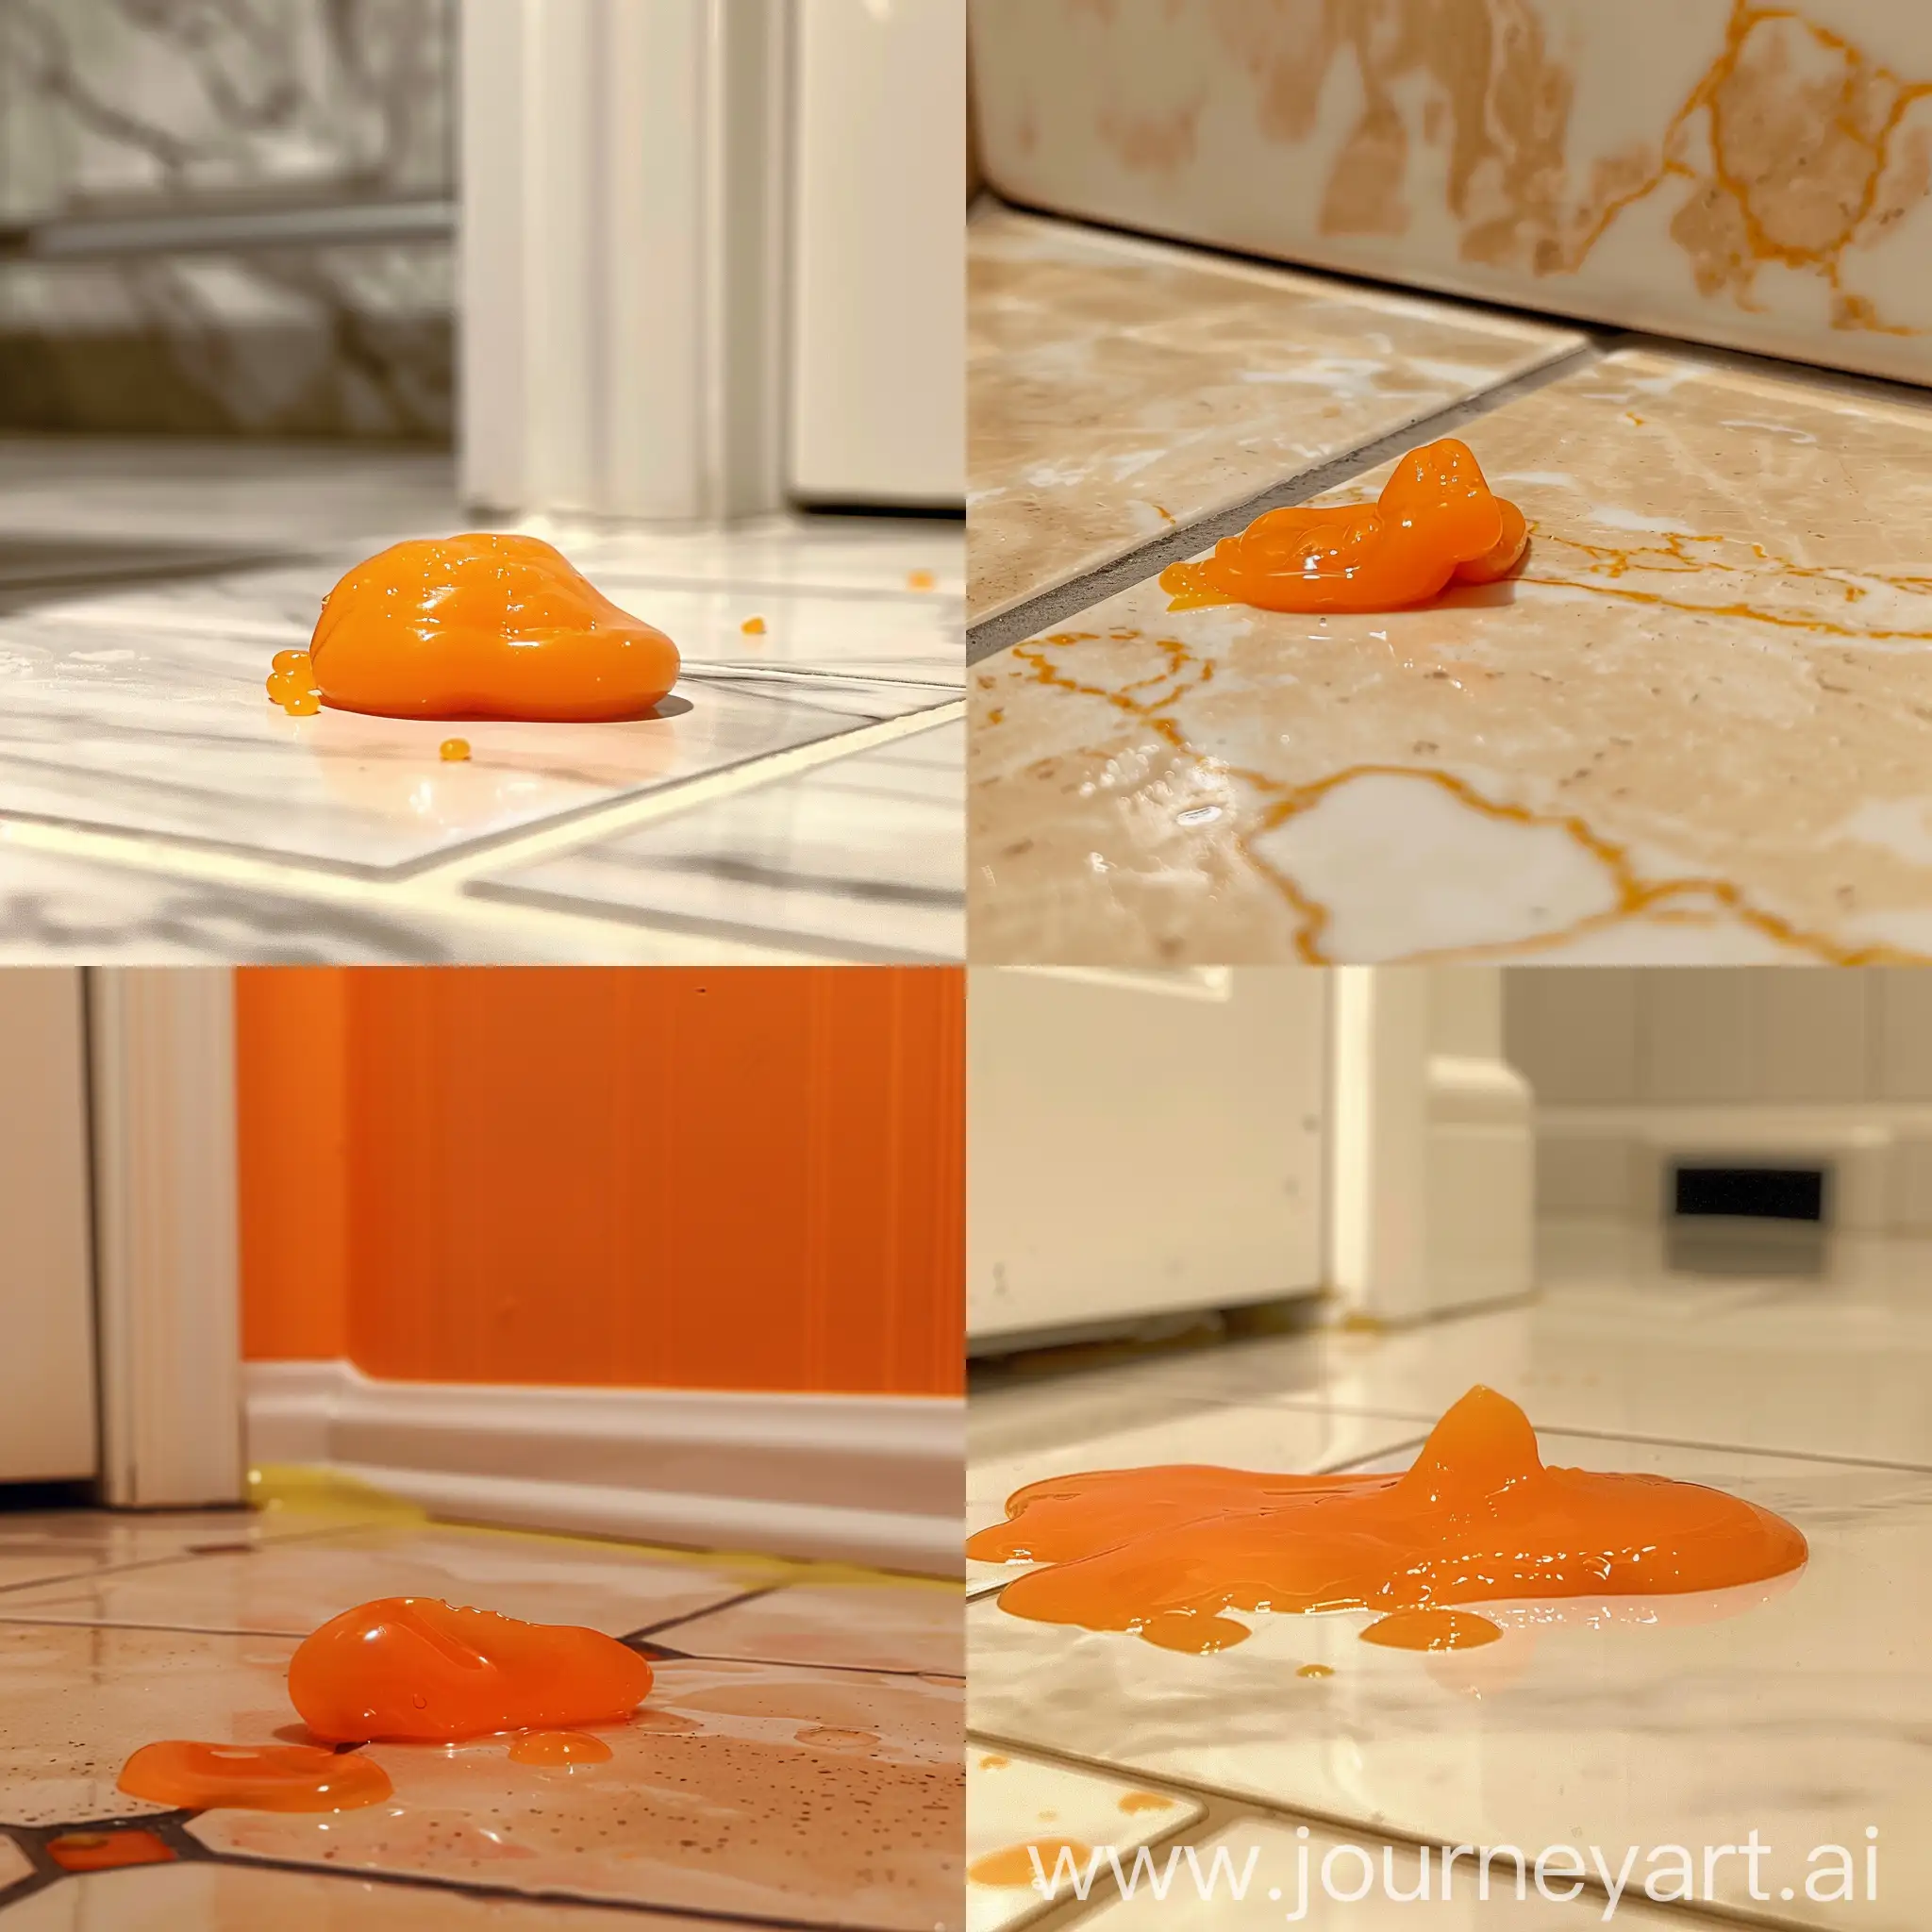 Realistic, view from close, close up angle of a tiny small orange goop on a bathroom floor, close up of a small tiny orange gelatinous goop on the floor, gelatinous orange slime goo